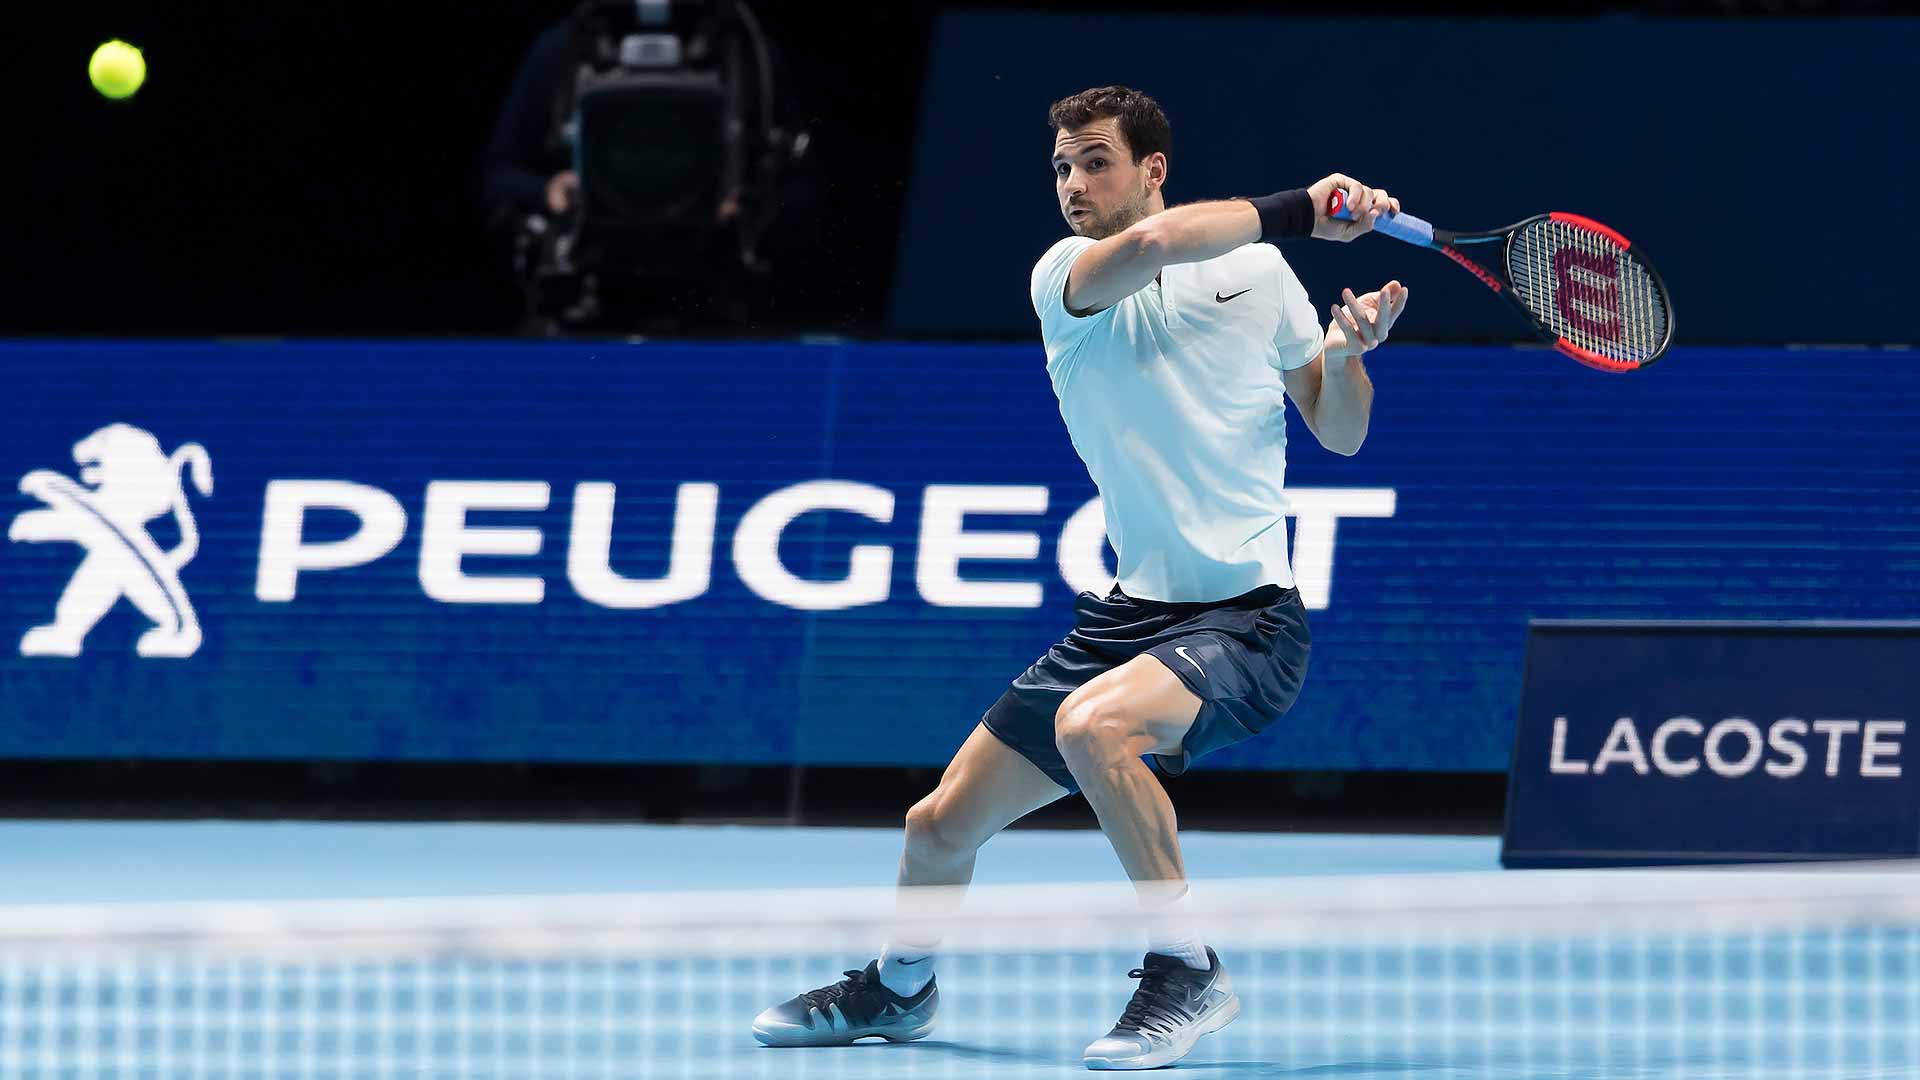 Grigor Dimitrov Finishes Group Play Unbeaten At The Nitto ATP Final | Nitto ATP Finals1920 x 1080